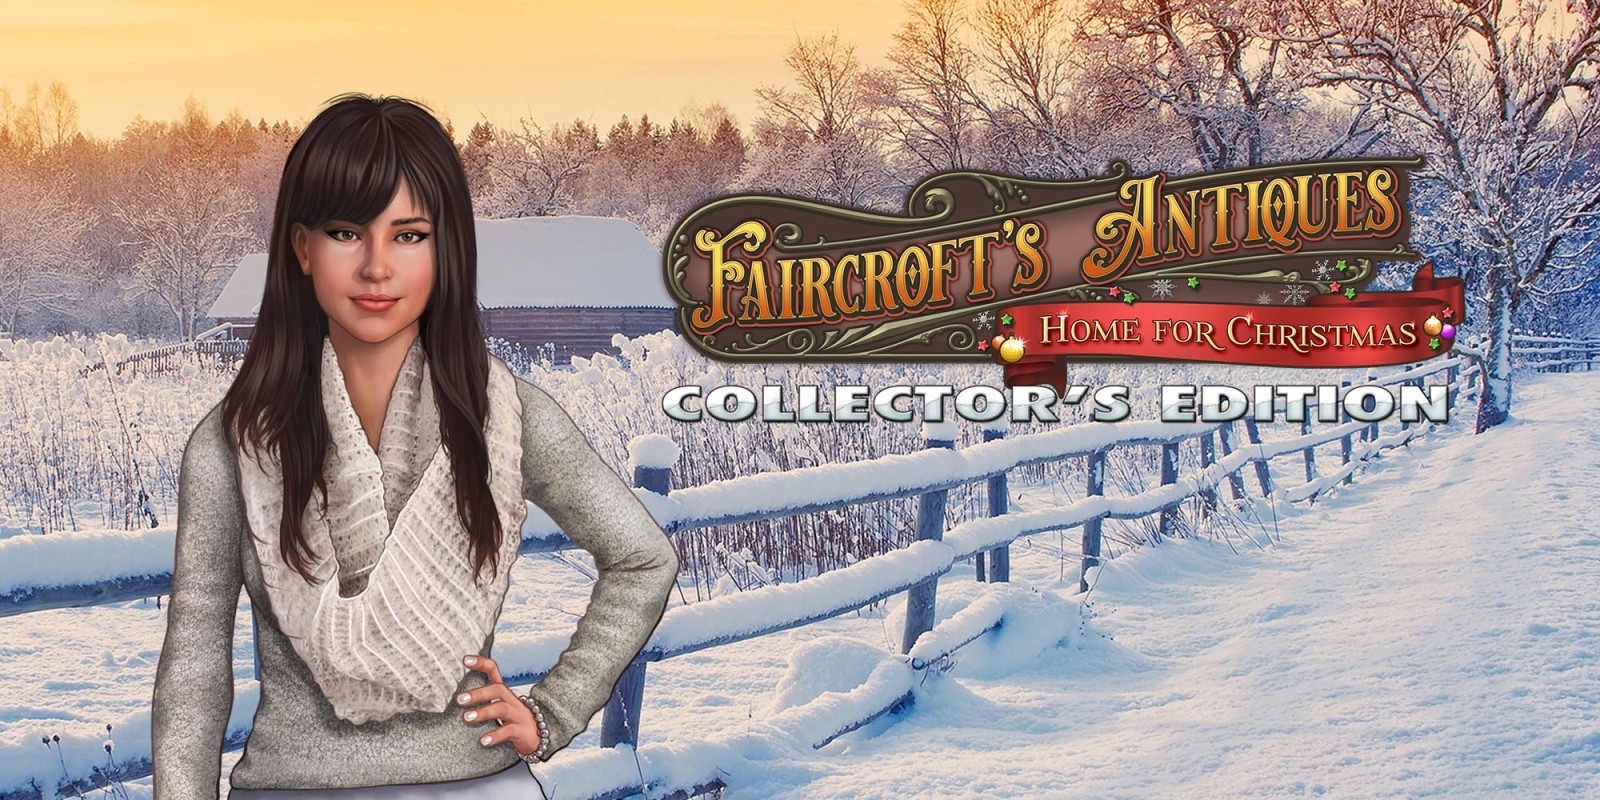 Faircroft's Antiques: Home for Christmas Collector's Edition